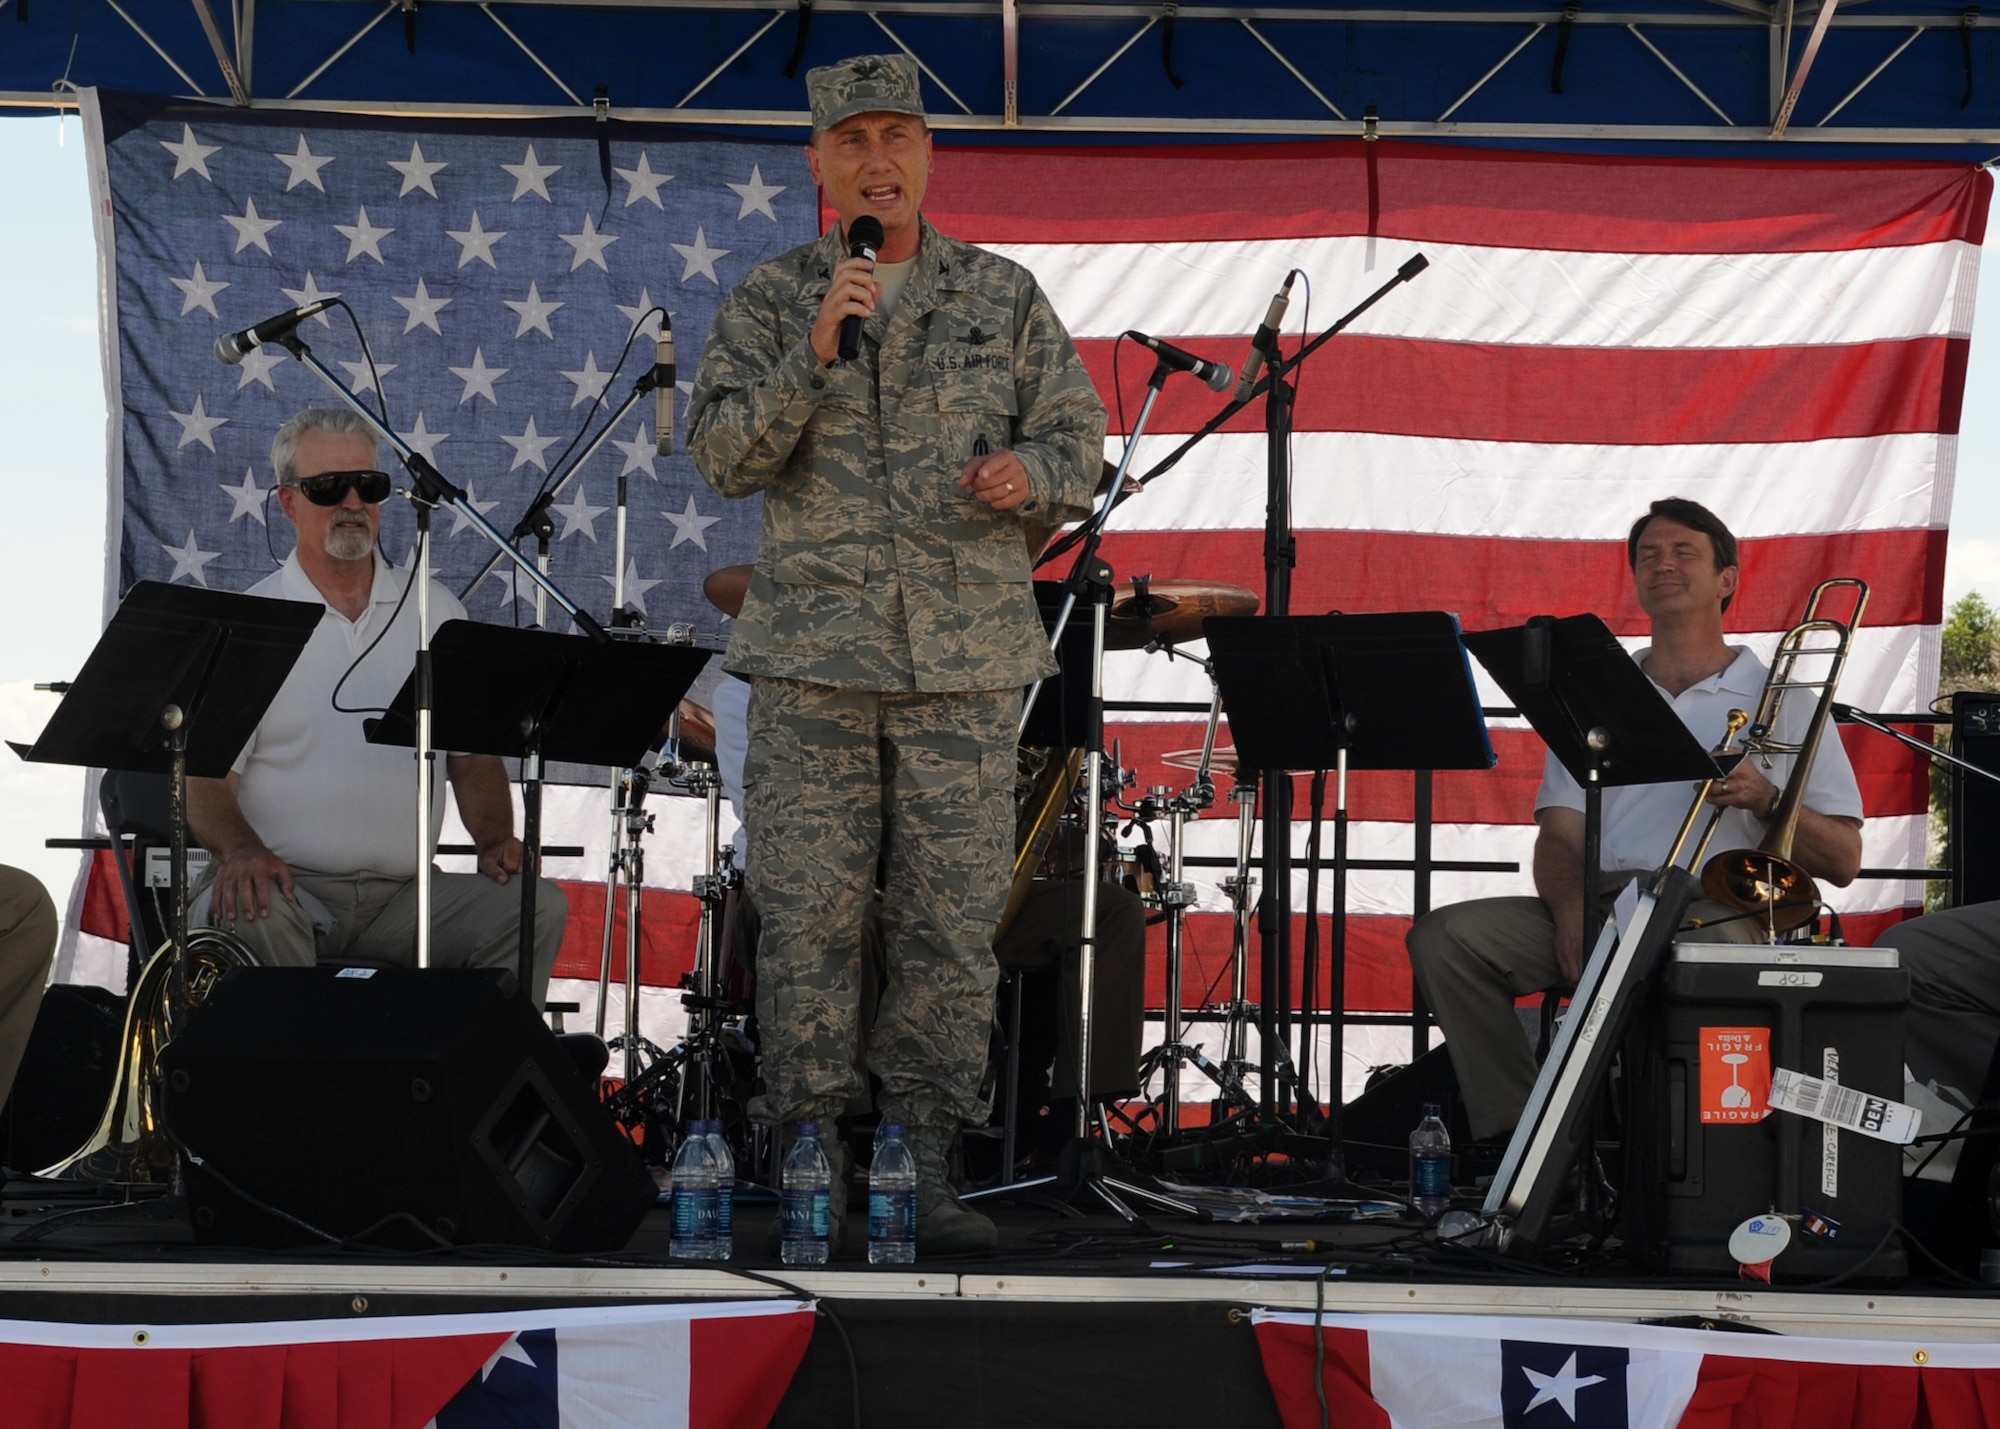 BUCKLEY AIR FORCE BASE, Colo. – Col. Clint Crosier, 460th Space Wing commander, kicks off Freedom Fest here, July 1.  The festivities provided armed forces members and their families various foods, events for children, raffle prize giveaways and live music.  (U.S. Air Force photo by Senior Airman Randi Flaugh)